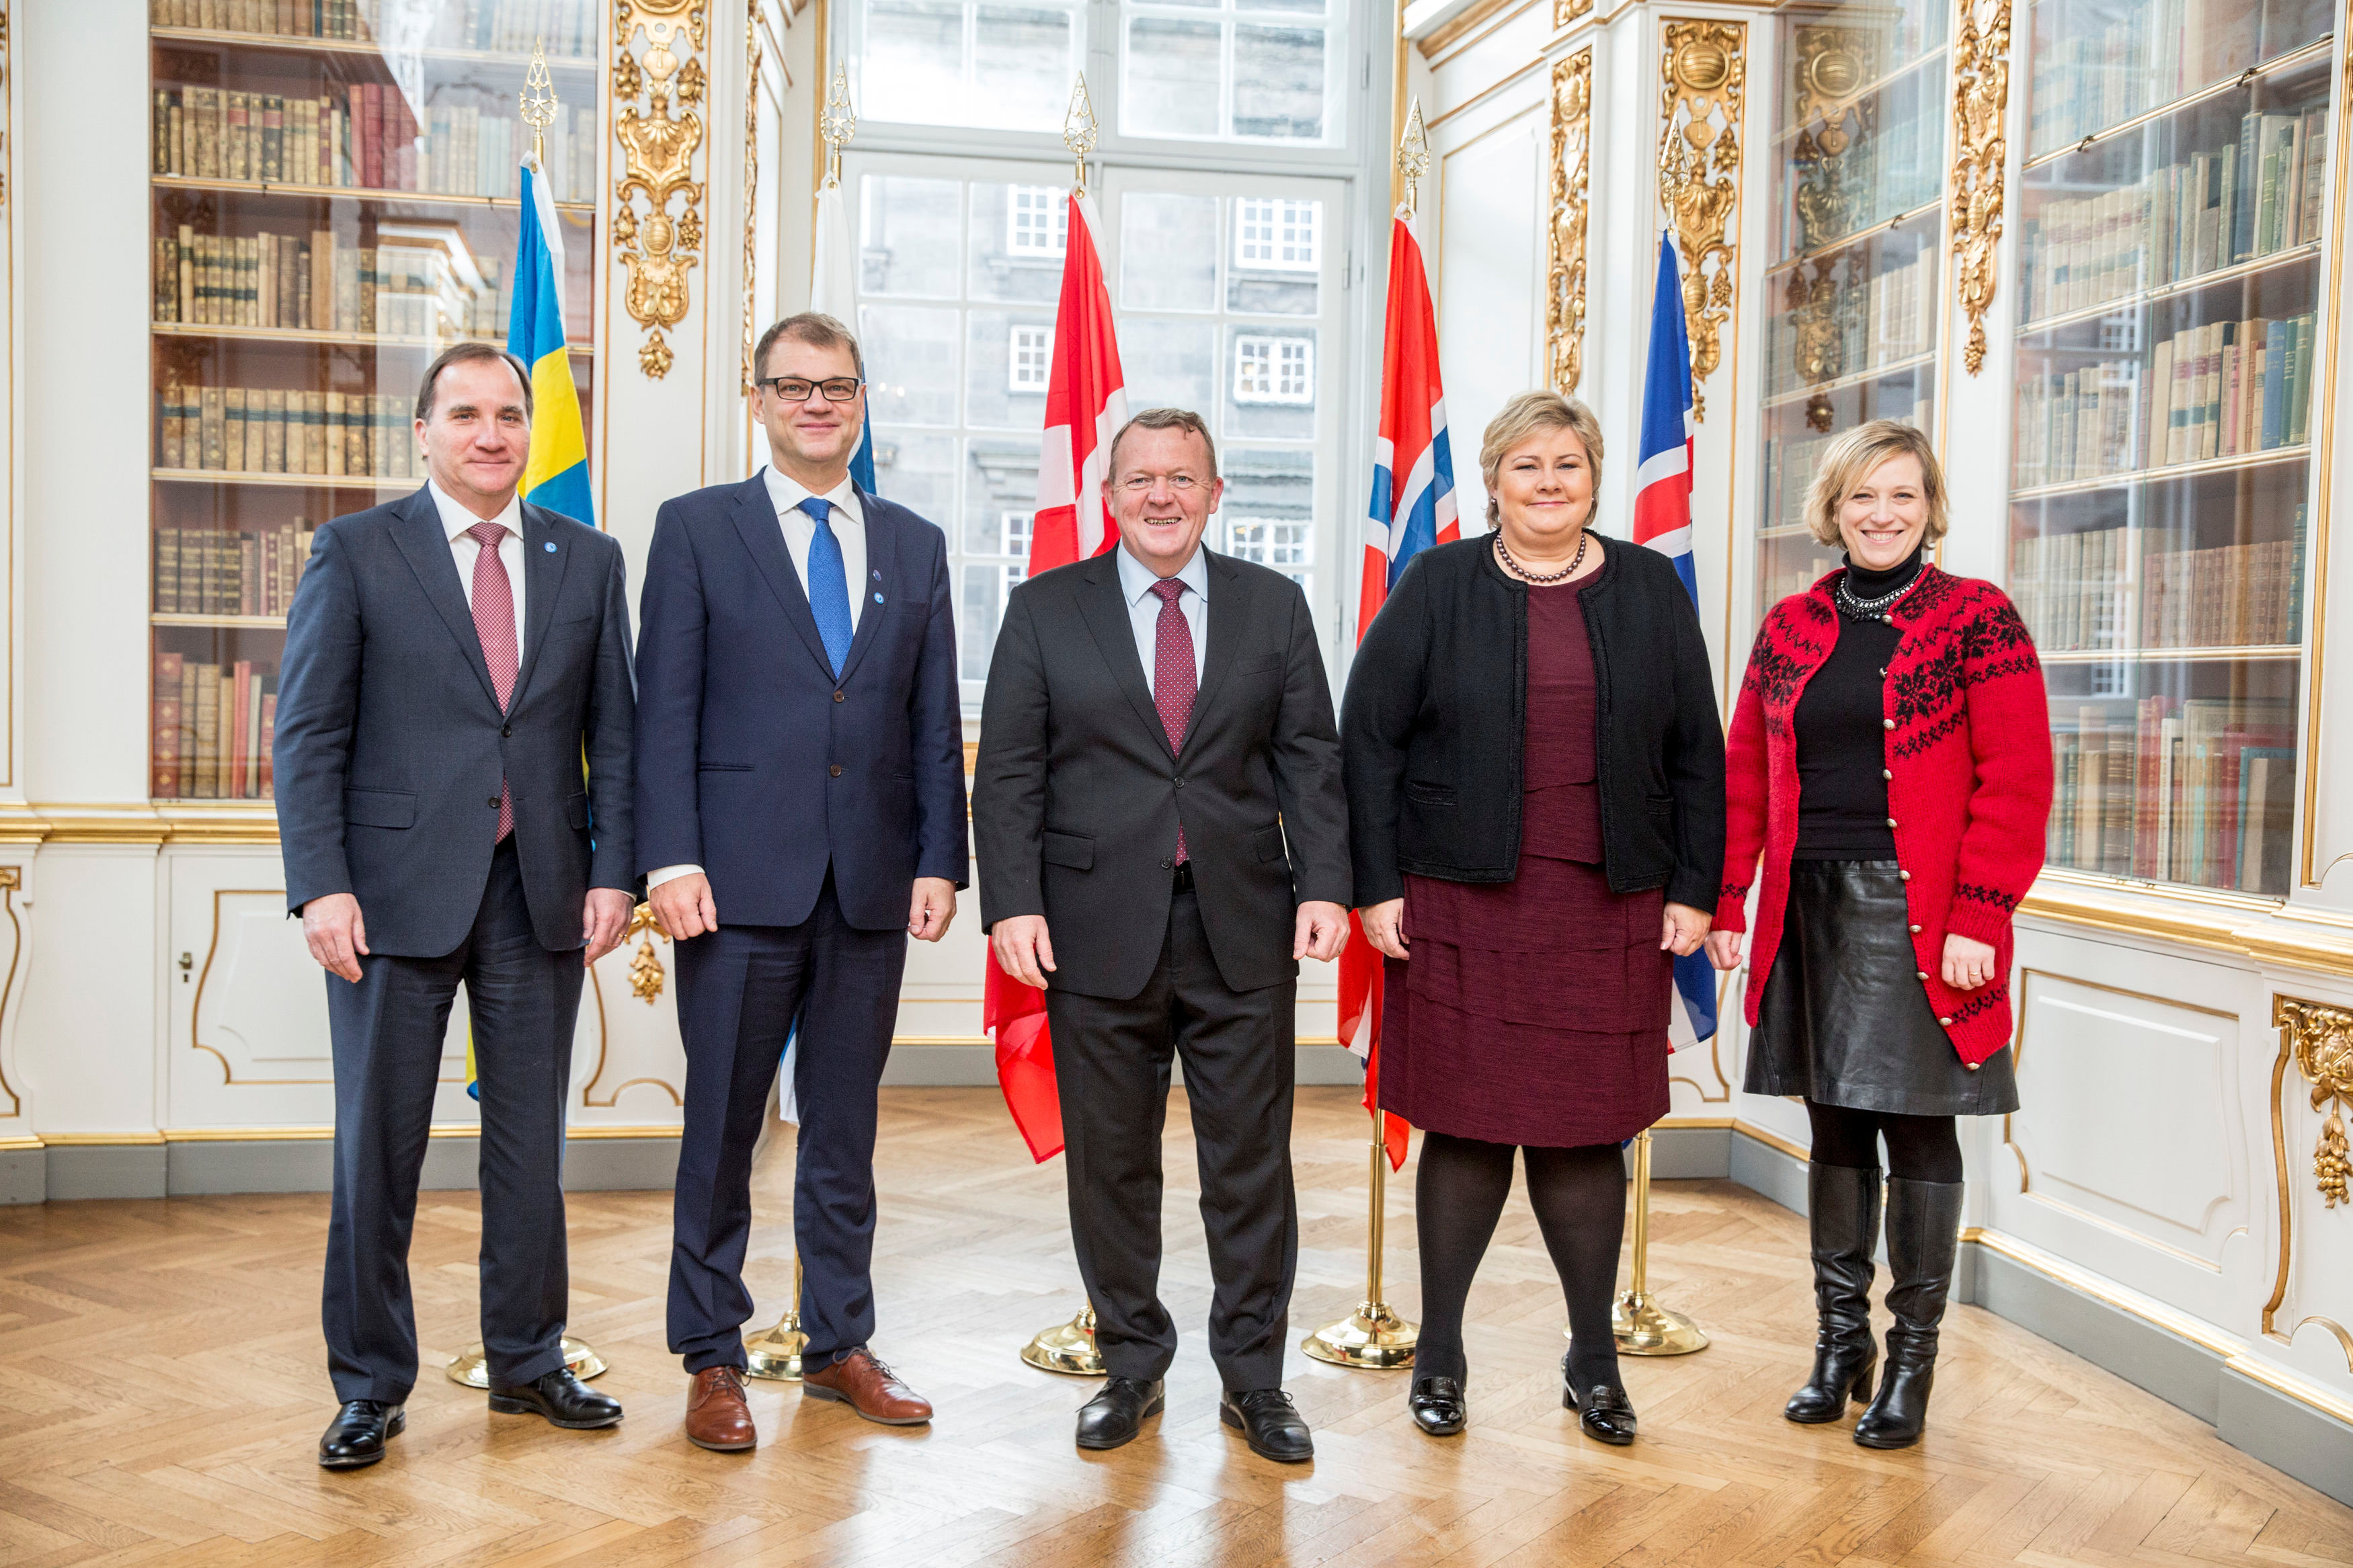 (L-R)Prime ministers Stefan Lofven of Sweden, Juha Sipila of Finland, Lars Lokke Rasmussen of Denmark, Erna Solberg of Norway and Iceland's Minister of Social Affairs Eyglo Hardardottir pose for a family photo in the Danish Prime Minister's office on the occasion of the Nordic Council joint meeting in Copenhagen, Denmark, November 2, 2016. (Scanpix / Nikolai Linares via Reuters)